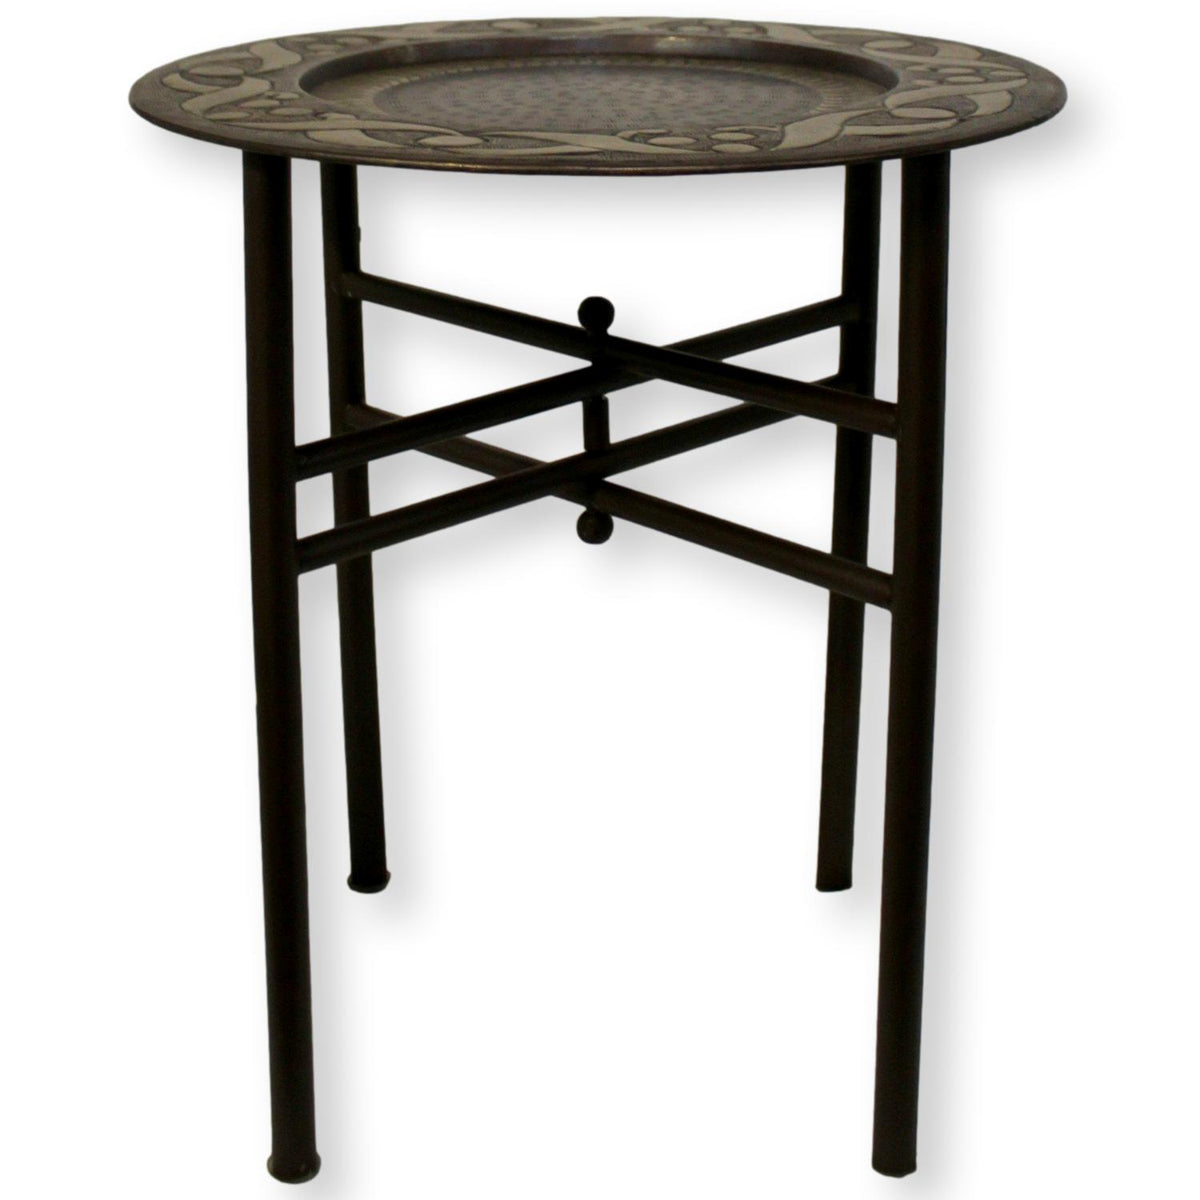 Hammered Bronze Round Accent Table